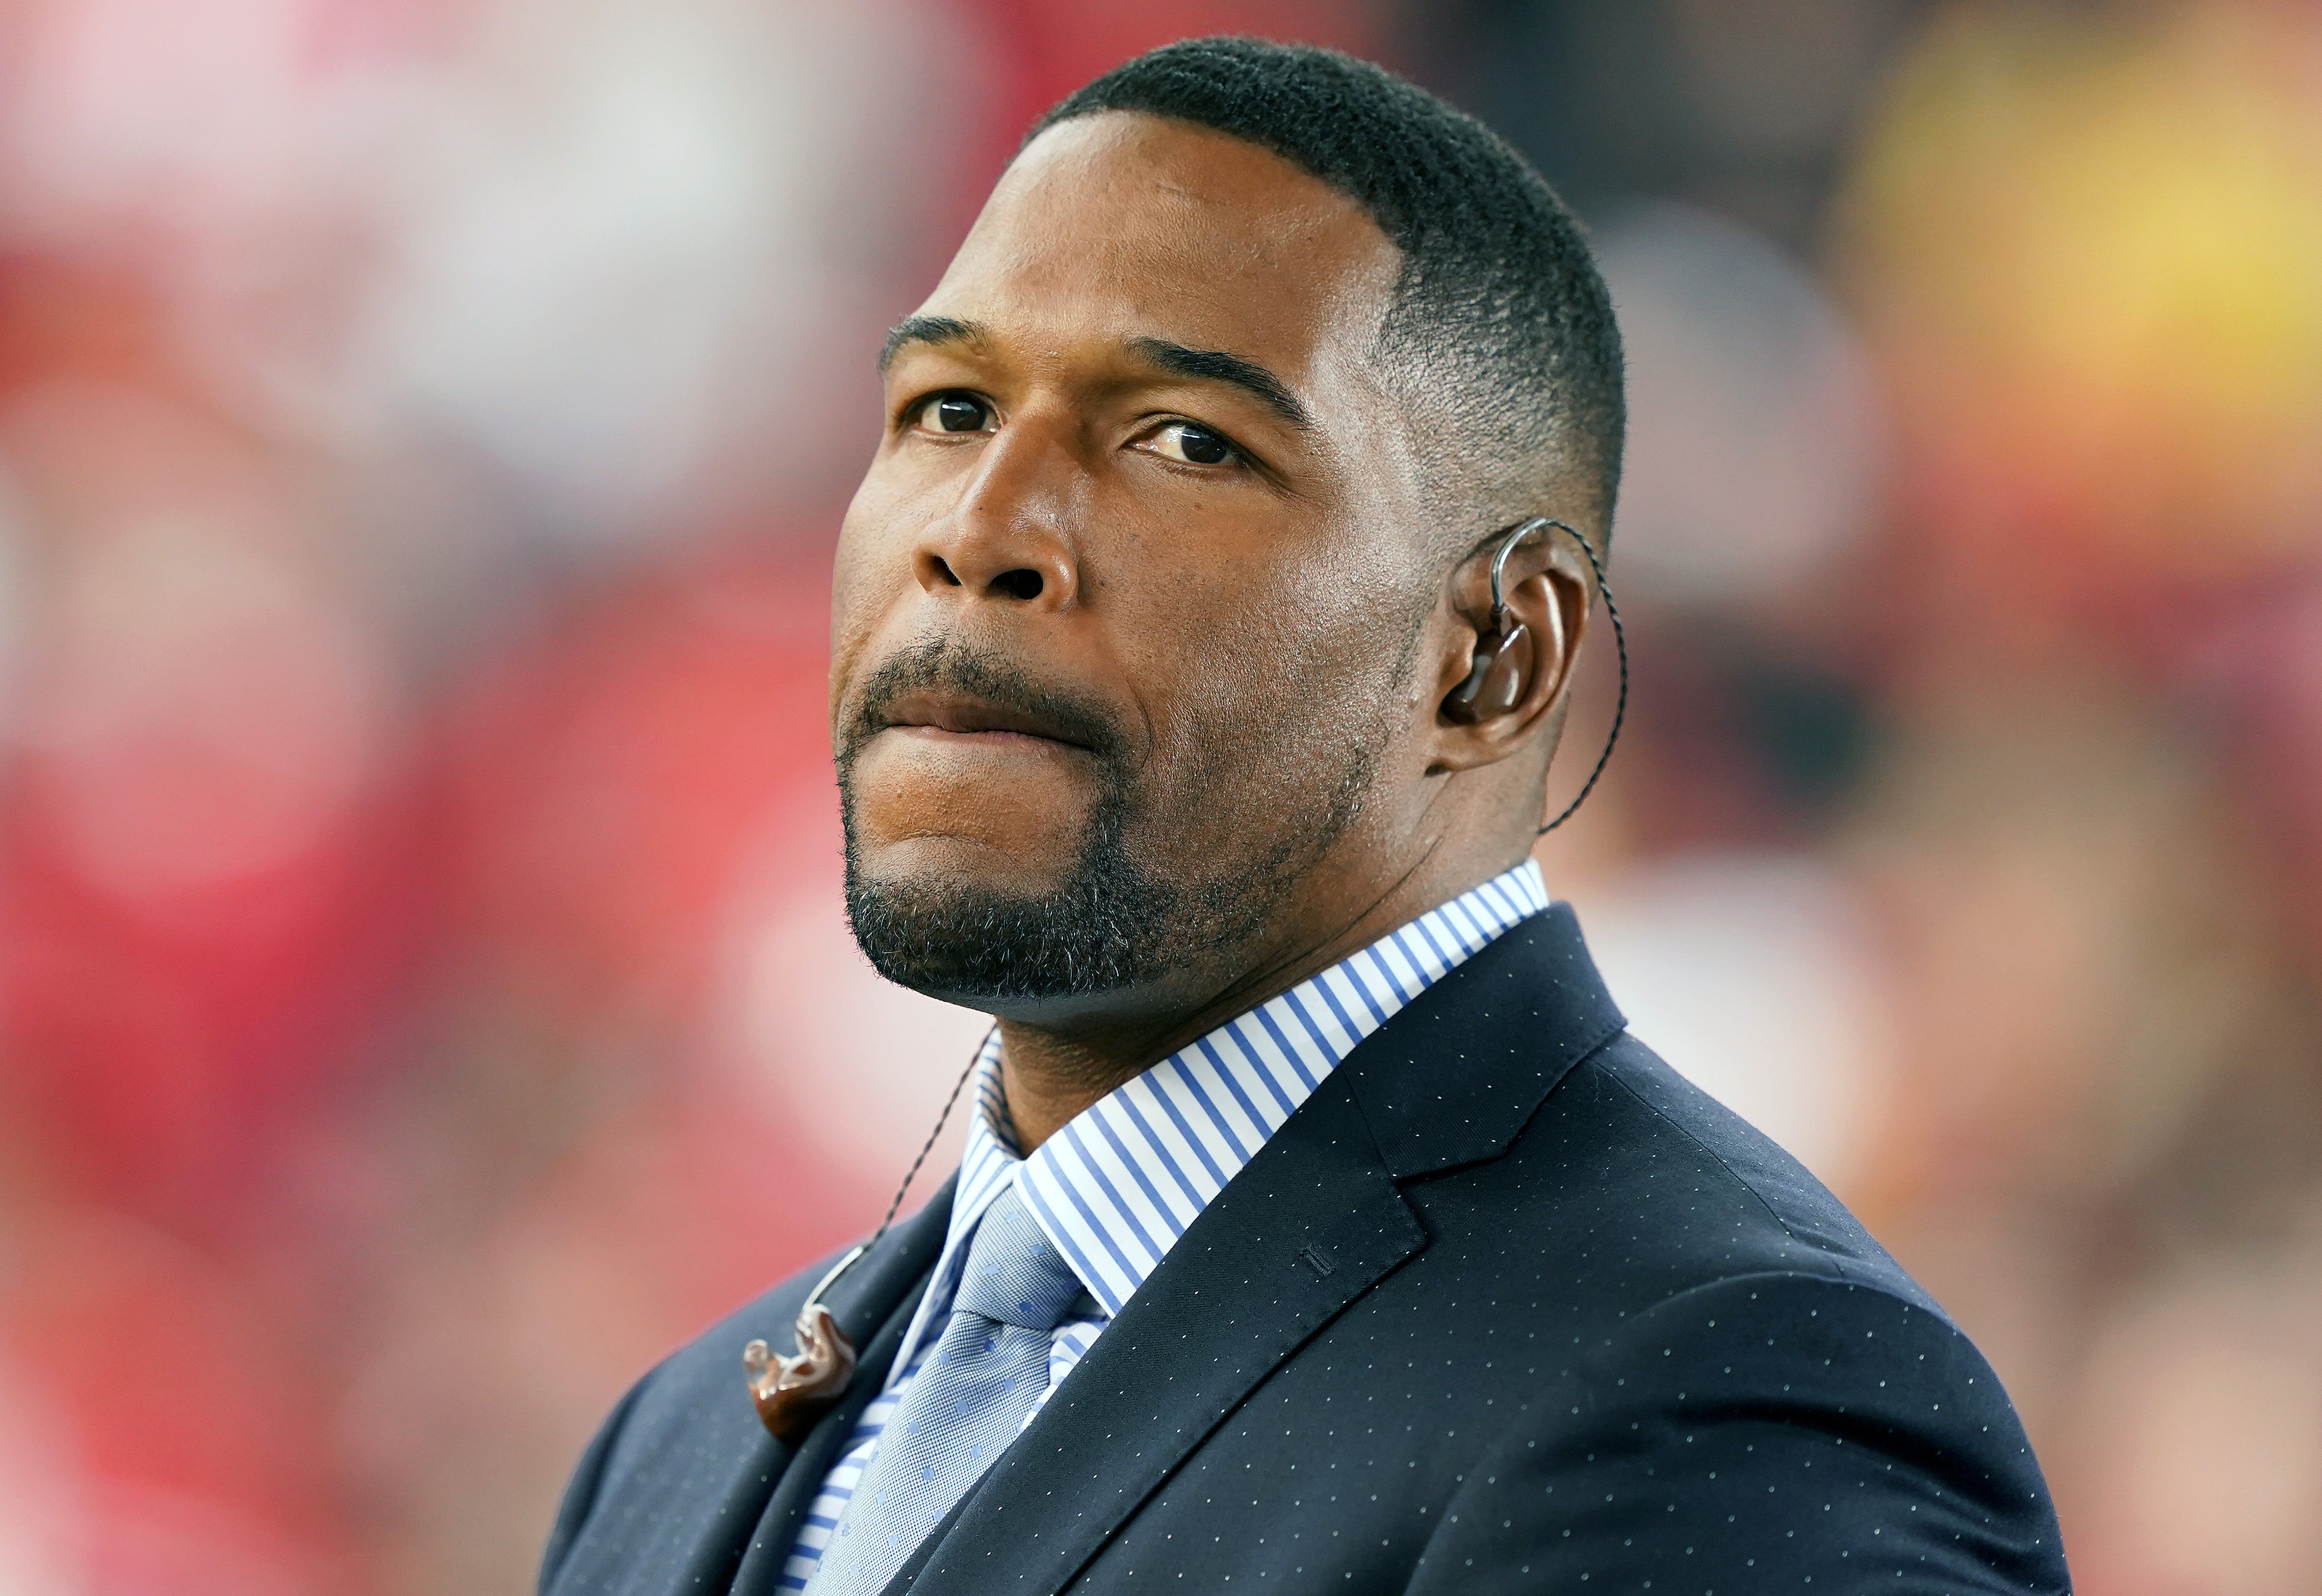 Michael Strahan at the NFC Championship game between the San Francisco 49ers and the Green Bay Packers in January 2020 | Photo: Getty Images